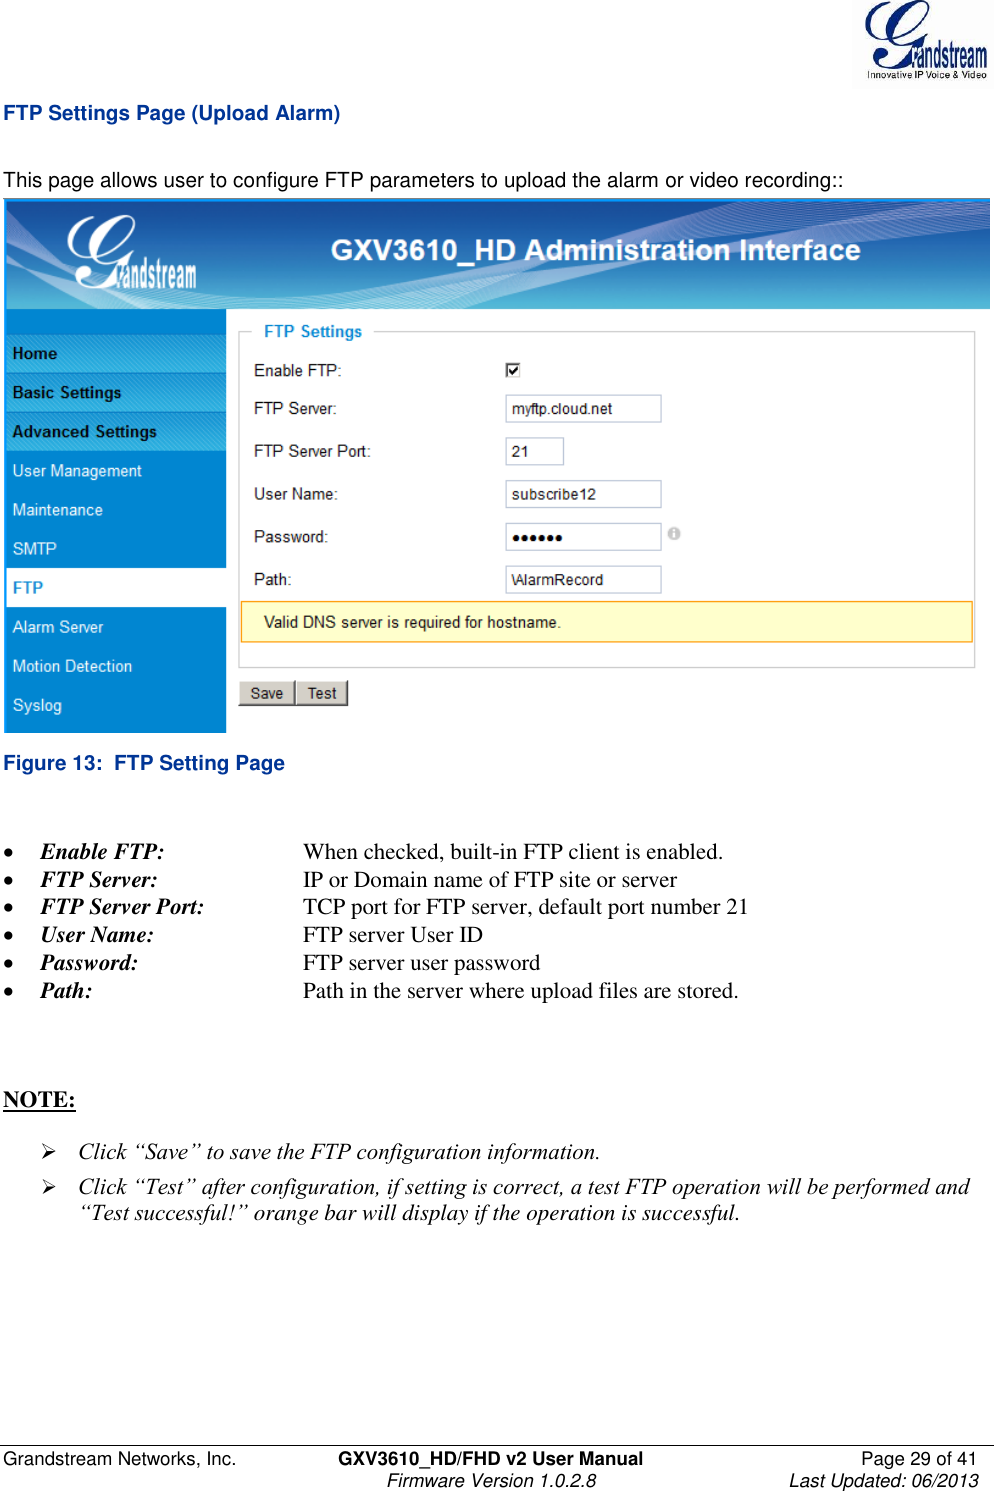  Grandstream Networks, Inc.  GXV3610_HD/FHD v2 User Manual  Page 29 of 41    Firmware Version 1.0.2.8  Last Updated: 06/2013  FTP Settings Page (Upload Alarm)  This page allows user to configure FTP parameters to upload the alarm or video recording::  Figure 13:  FTP Setting Page   Enable FTP:     When checked, built-in FTP client is enabled.   FTP Server:     IP or Domain name of FTP site or server  FTP Server Port:     TCP port for FTP server, default port number 21  User Name:     FTP server User ID  Password:      FTP server user password  Path:       Path in the server where upload files are stored.     NOTE:    Click “Save” to save the FTP configuration information.  Click “Test” after configuration, if setting is correct, a test FTP operation will be performed and “Test successful!” orange bar will display if the operation is successful.  